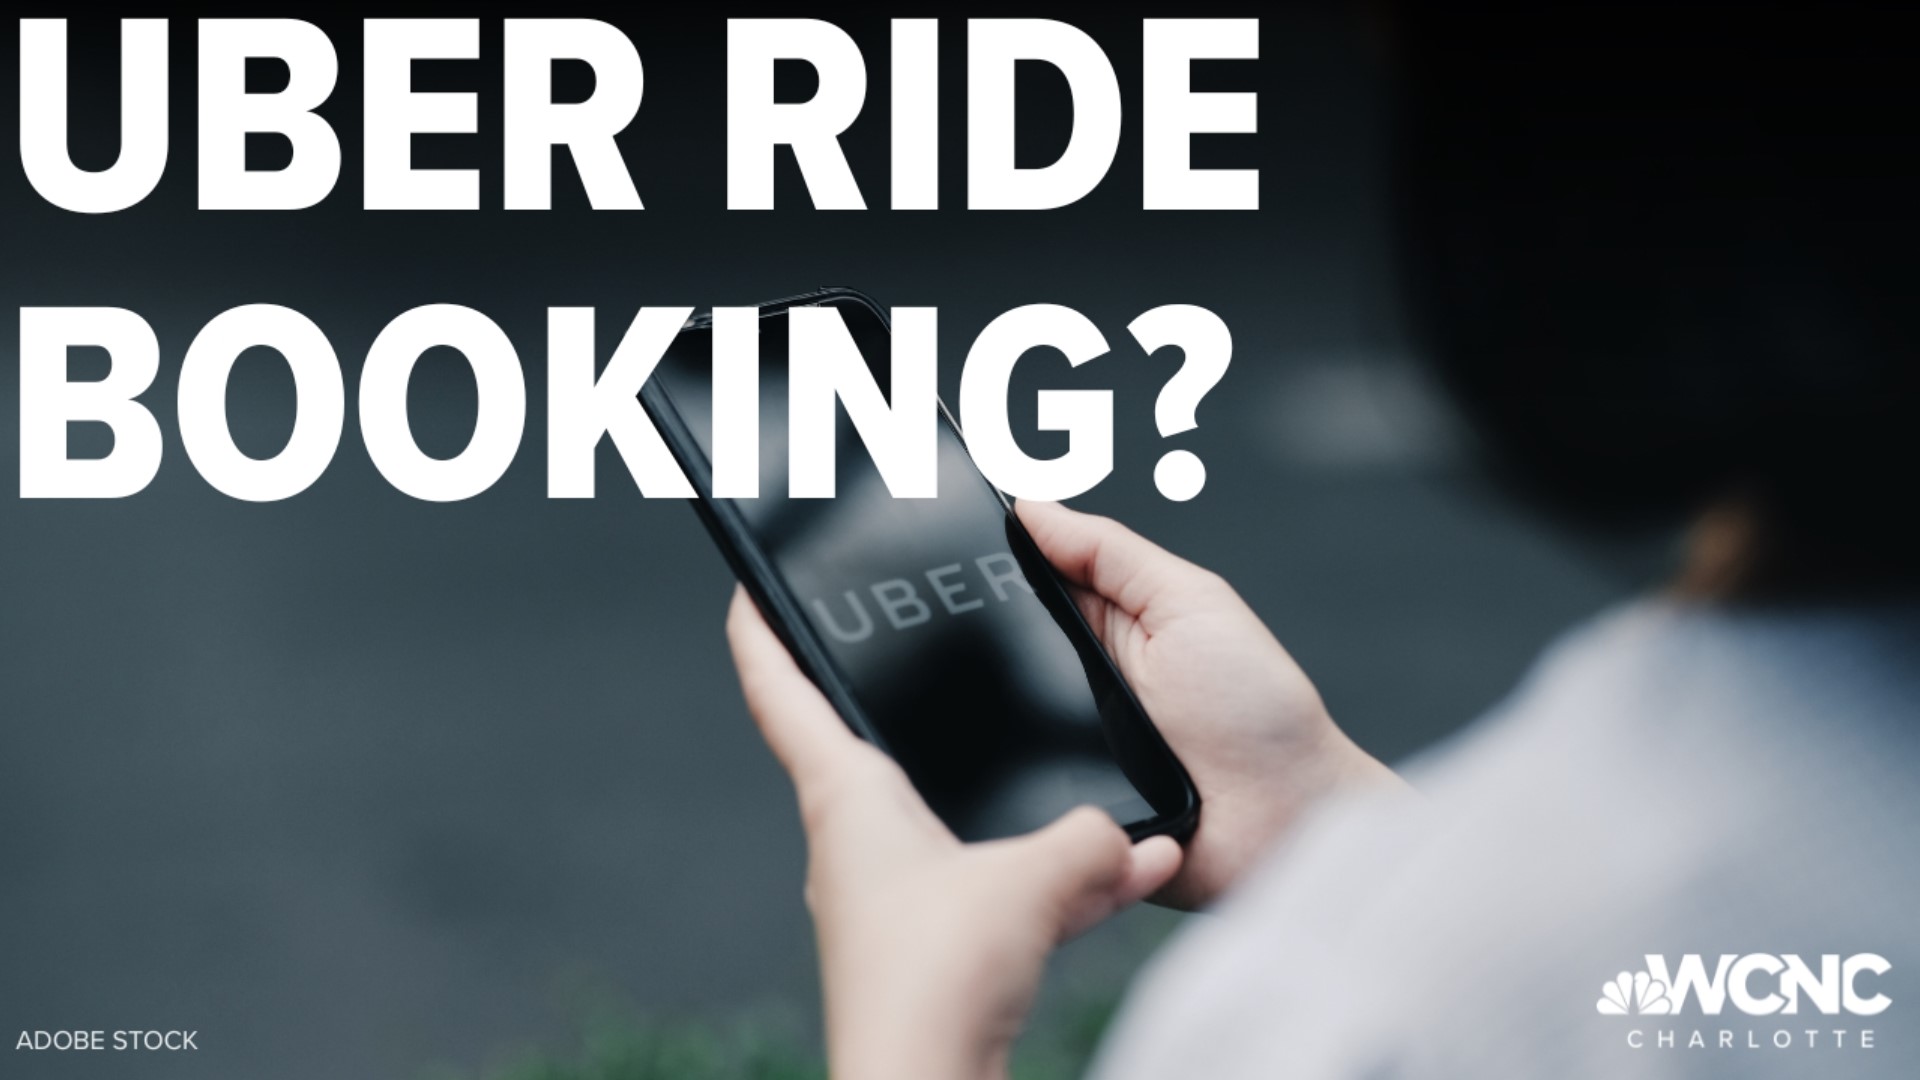 Ride-hailing app Uber has become a go-to for getting from point A to point B and now it's upping its game.